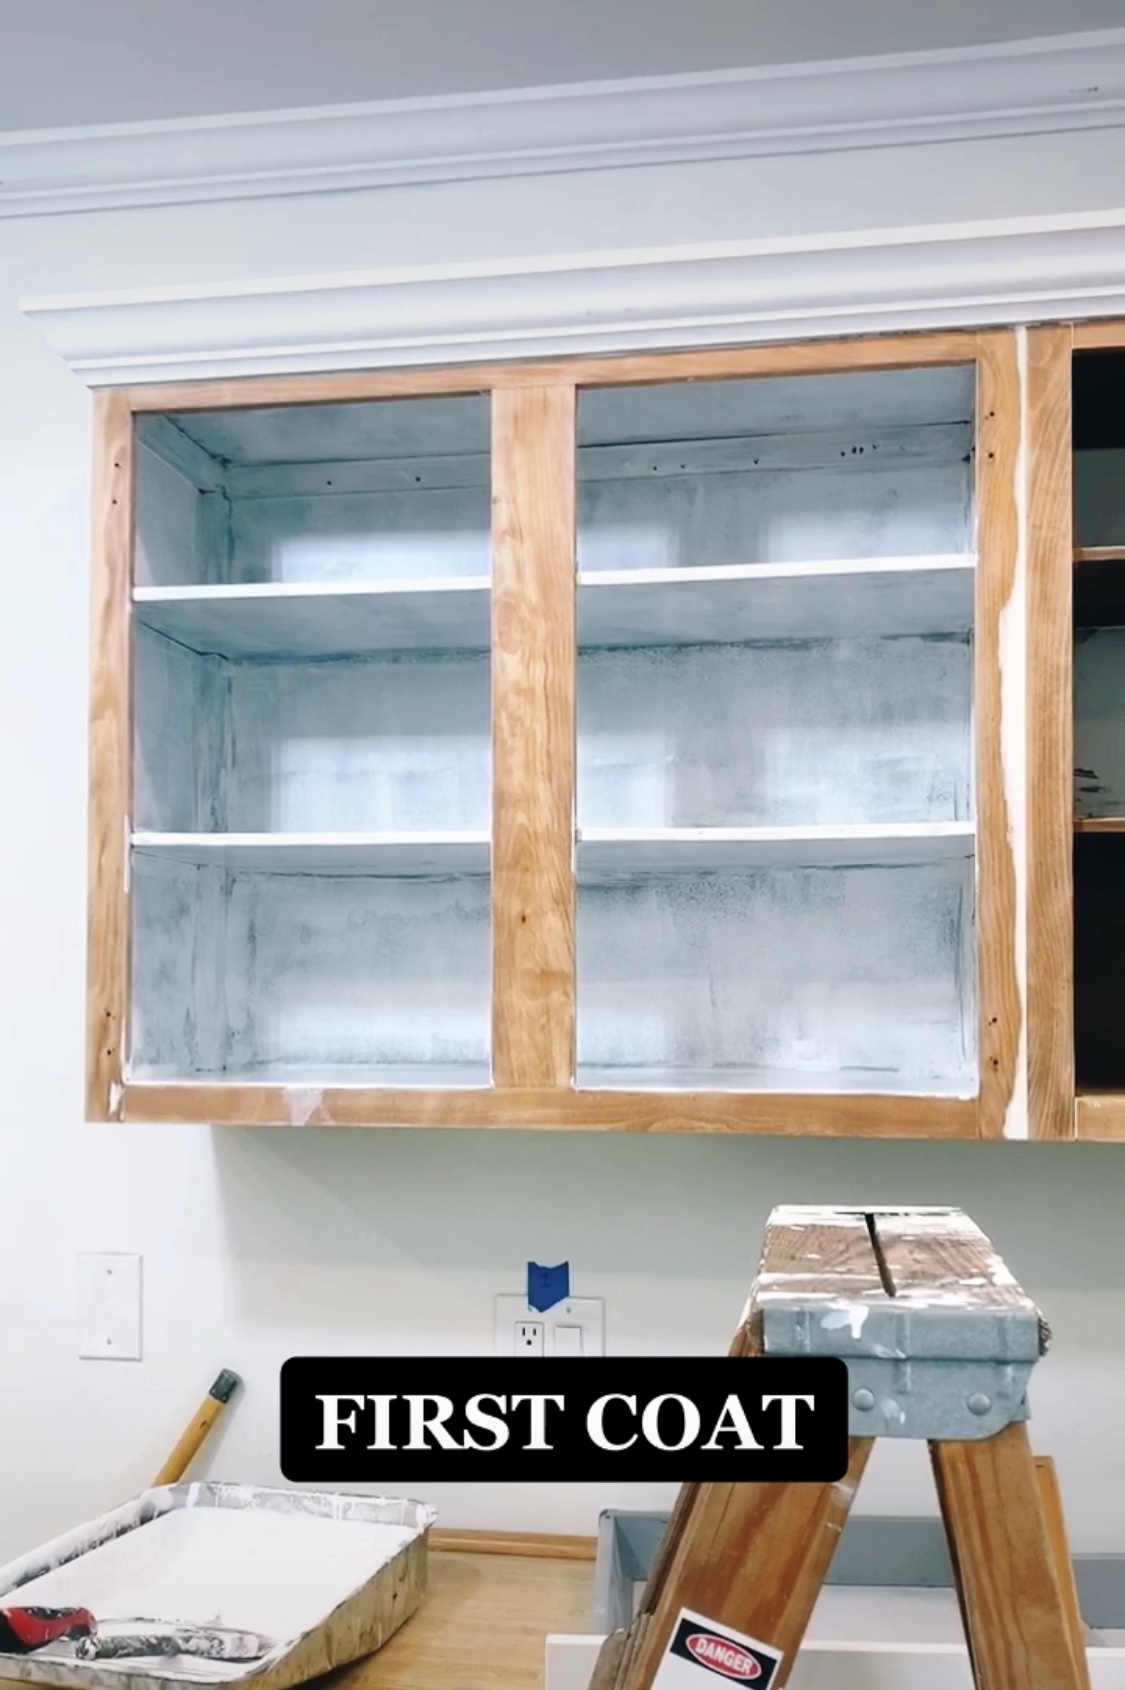 How To Paint Wooden Kitchen Cabinets - Step by Step Guide - Step 4 Painting First Coat Kitchen Photos #diy #cabinets #Kitchen #painting #kitchencabinets #paintingkitchen #benjaminmoore #beforephotos #home #diyhome #homeproject #westchestercounty #newyork Simone Piliero - Simply by Simone